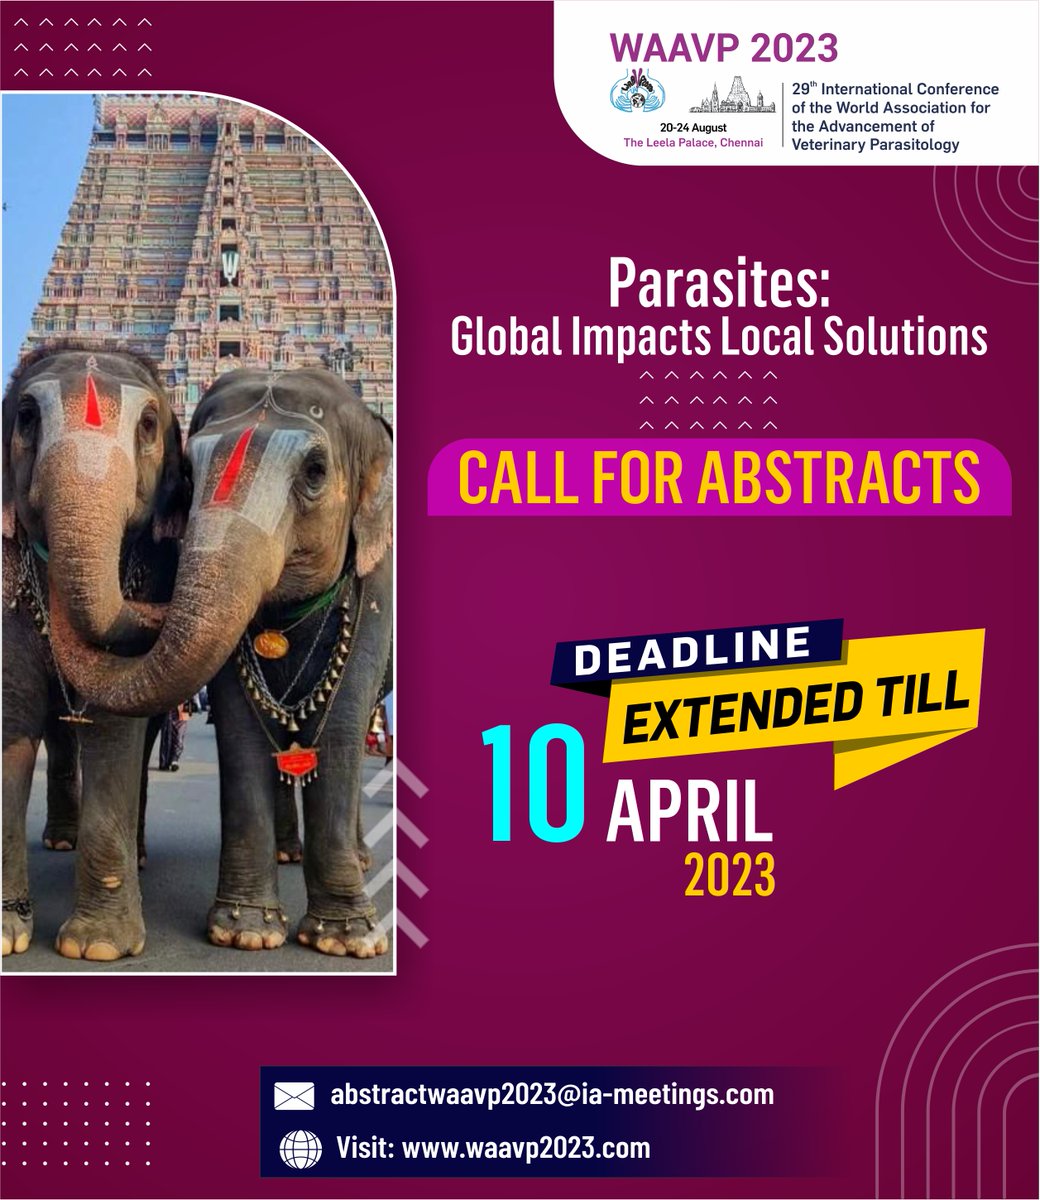 Attention veterinarians and parasitologists, you asked for more time, and we answered! Abstract submission for WAAVP 2023 has been extended till 10th April 2023. Don’t wait, submit your abstract now: waavp2023.com #WAAVP2023 #Parasites #VeterinaryParasitology